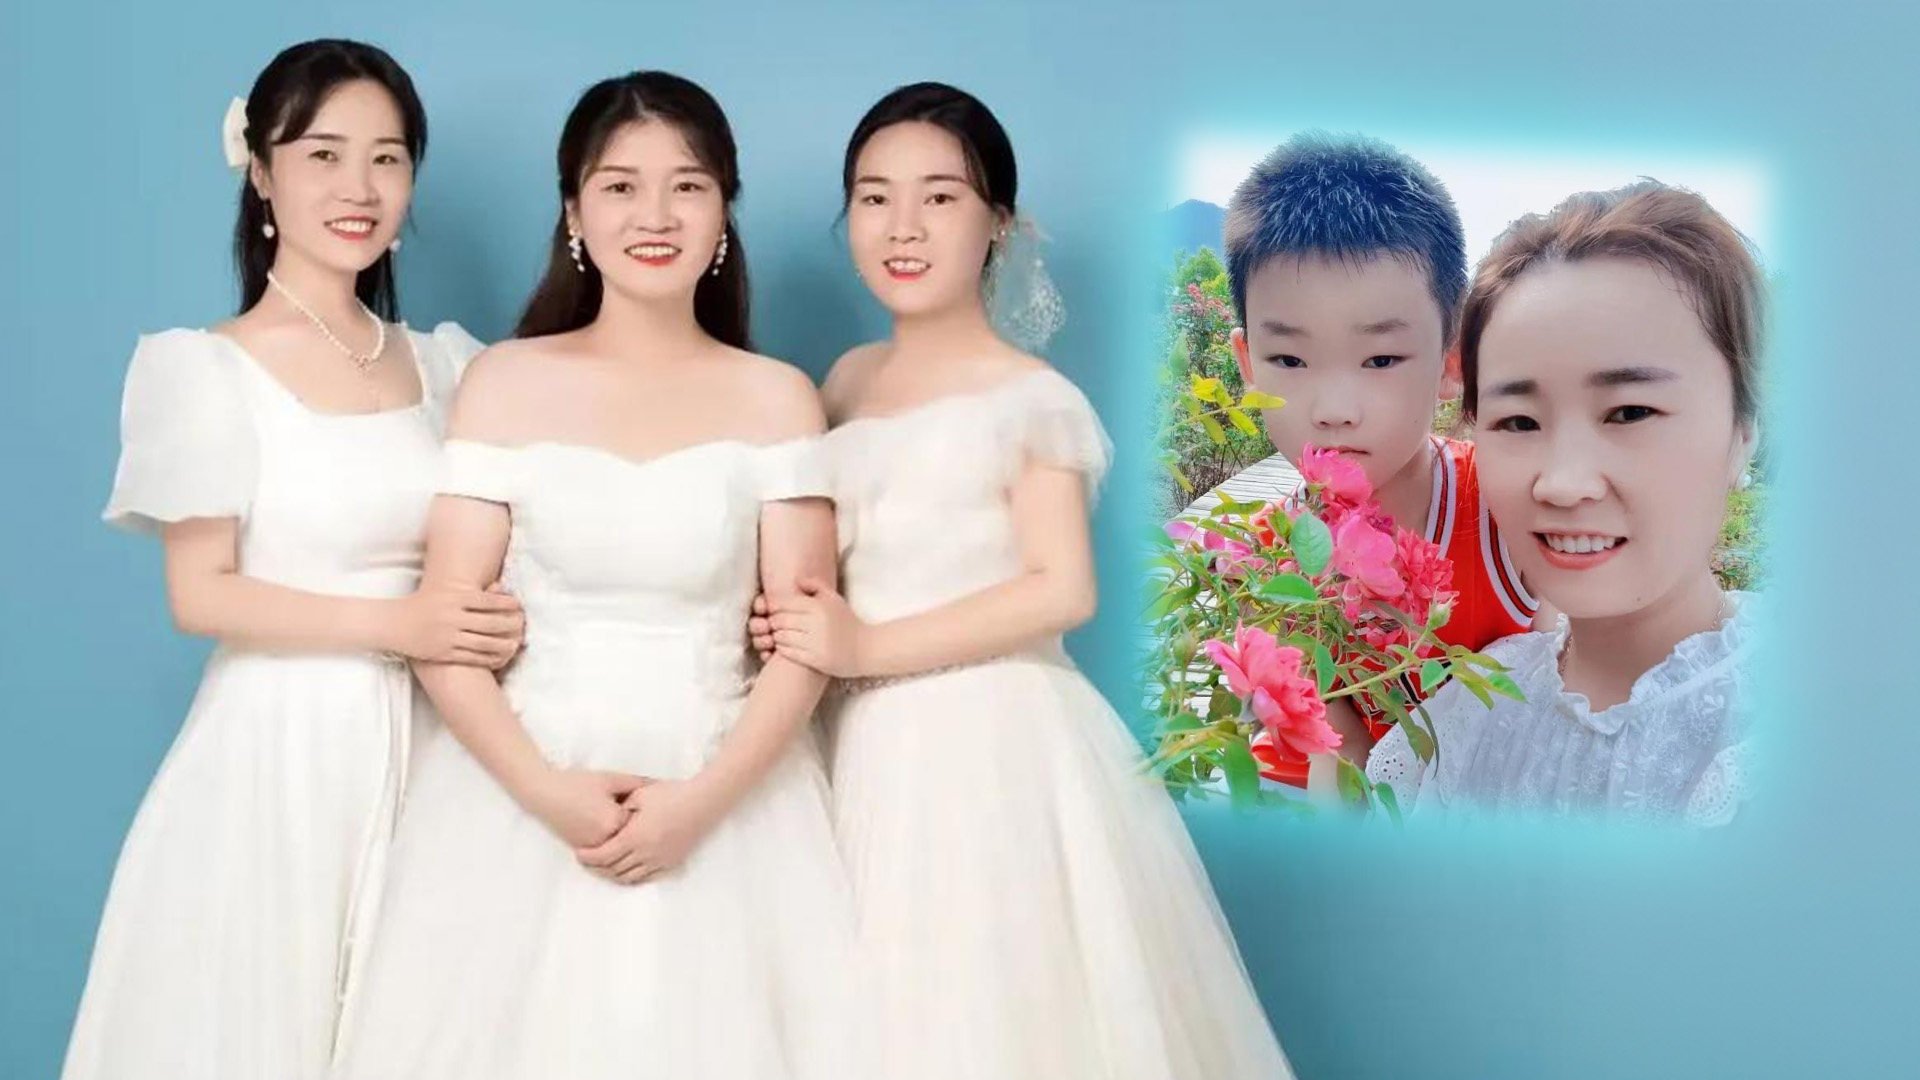 A 10 year-old boy in China, who lost his mother in a car accident, has transferred his love to the dead woman’s sister who looks just like her, breaking hearts on mainland social media. Photo: SCMP composite/myzaker.com